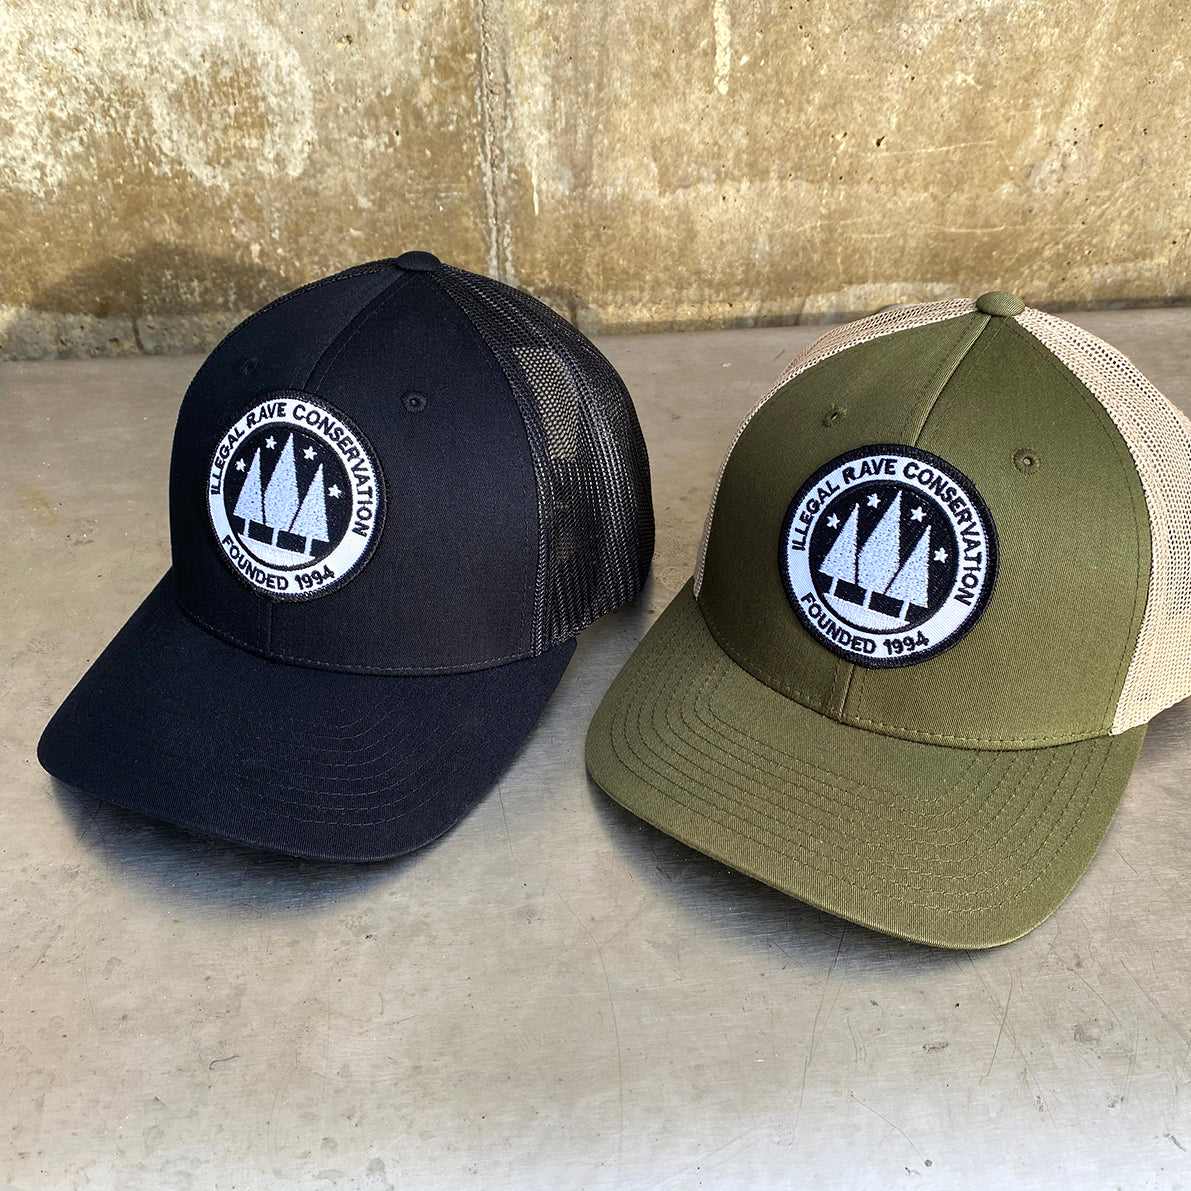 Illegal Rave - Trucker Cap - Green - Wasted Heroes